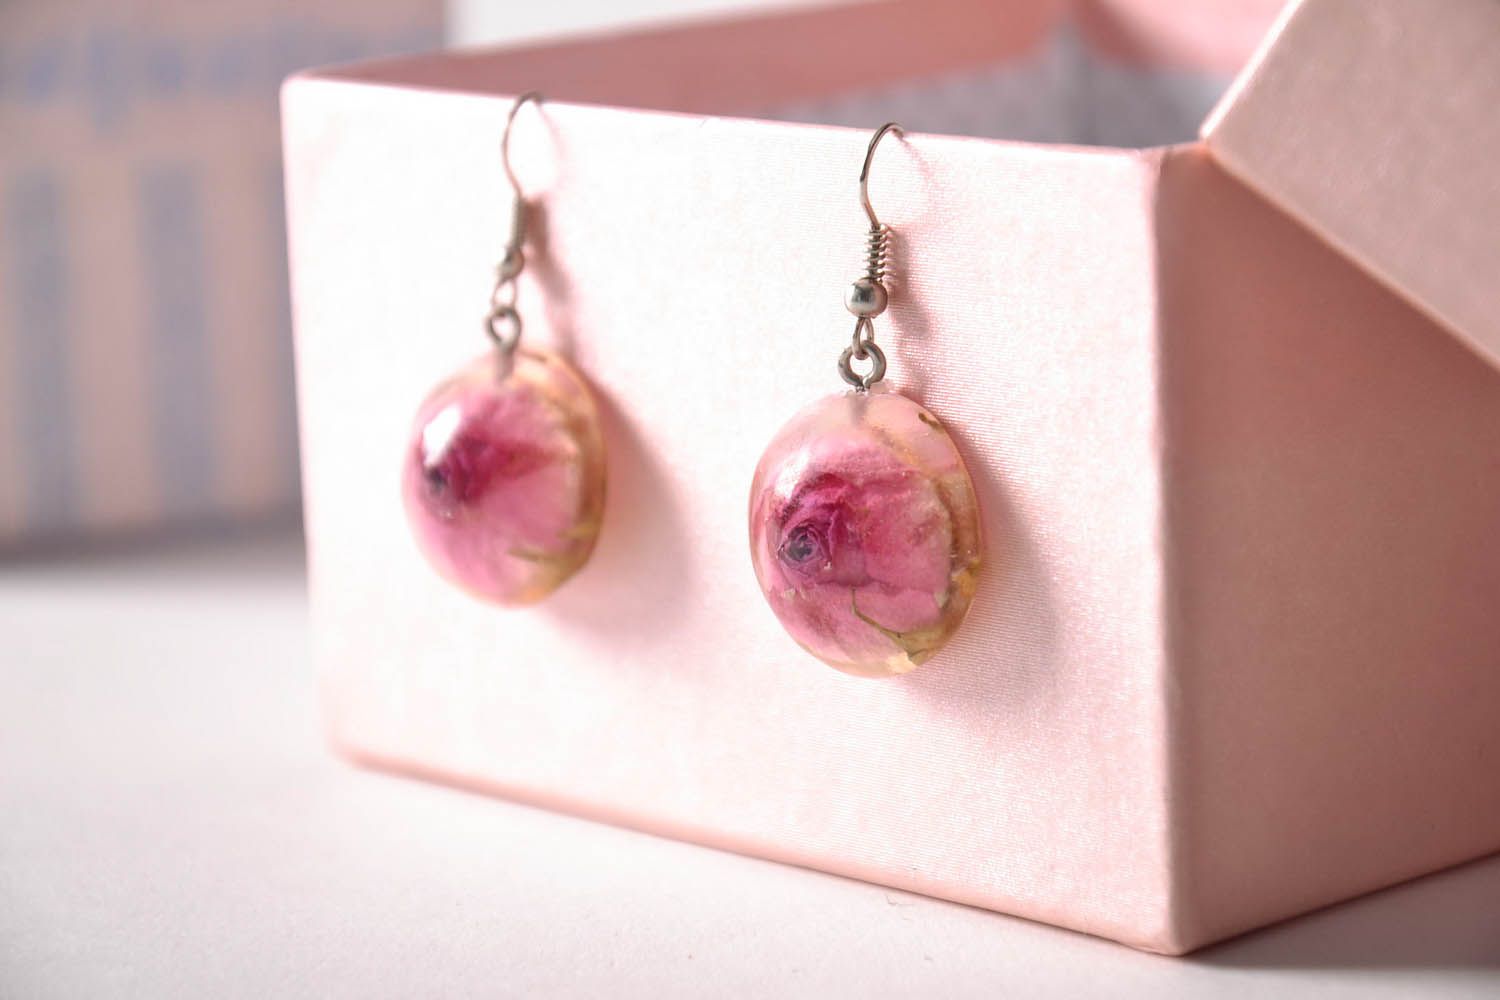 Earrings made of rose buds photo 2